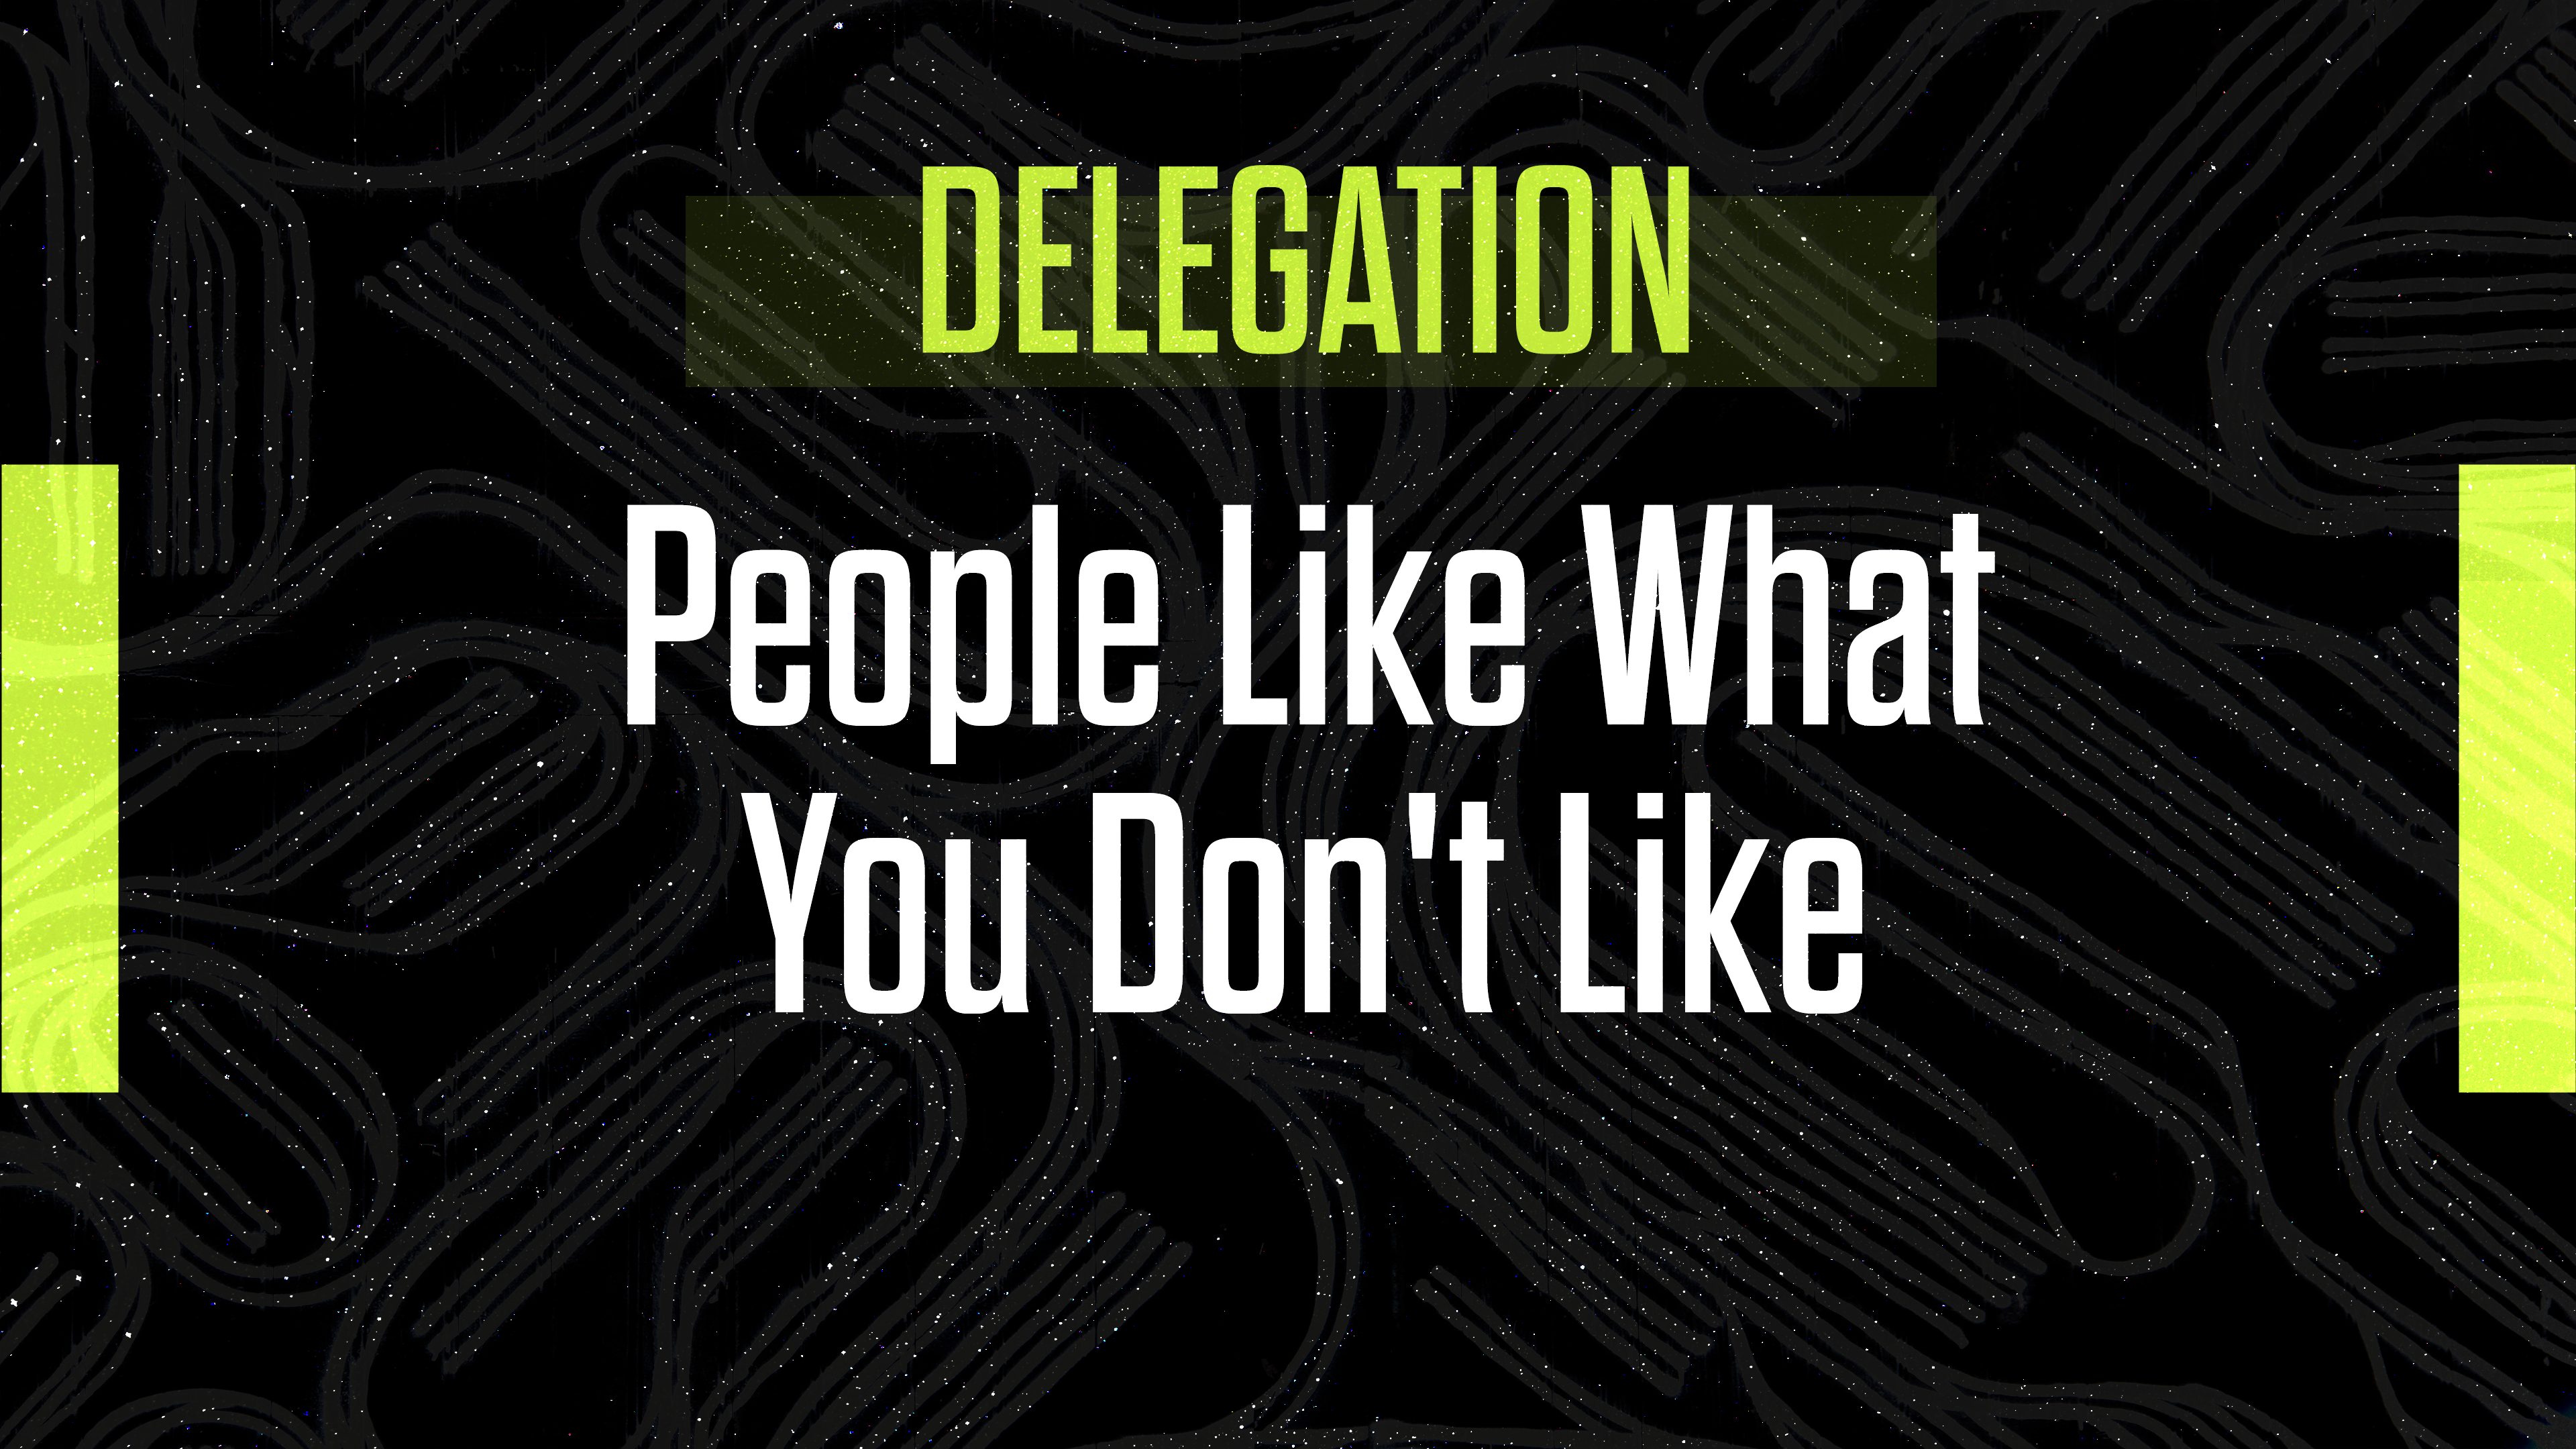 Master The Art of Delegation: People Like What You Don’t Like